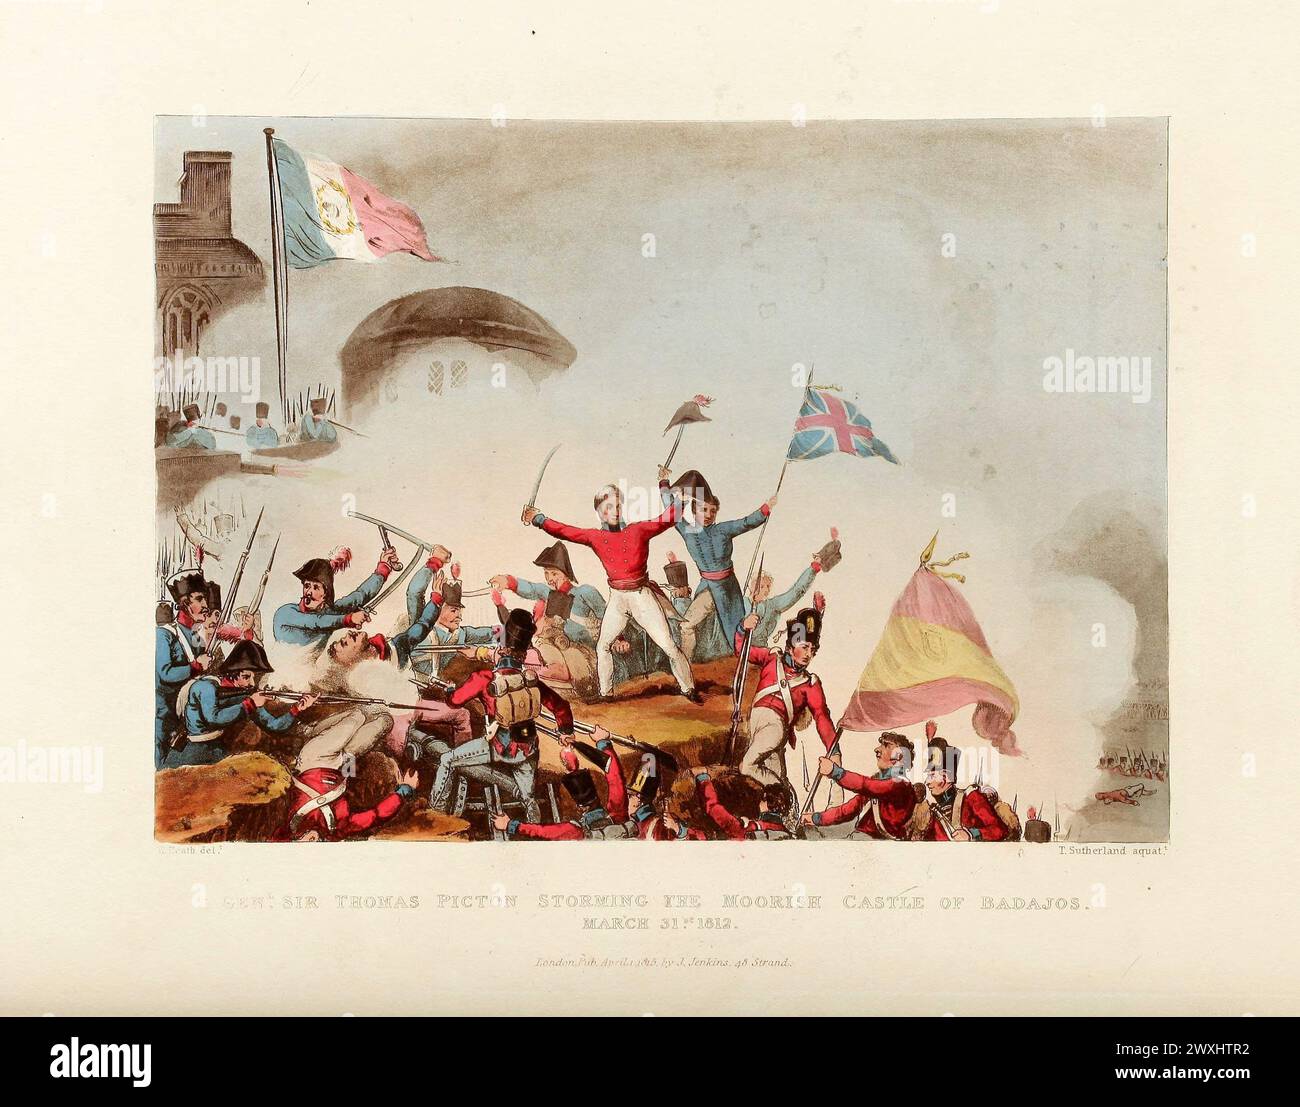 Sir Thomas Picton Storming the Moorish Castle of Badajos, March 31, 1812. Vintage Coloured Aquatint, published by James Jenkins, 1815,  from  The martial achievements of Great Britain and her allies : from 1799 to 1815. Stock Photo